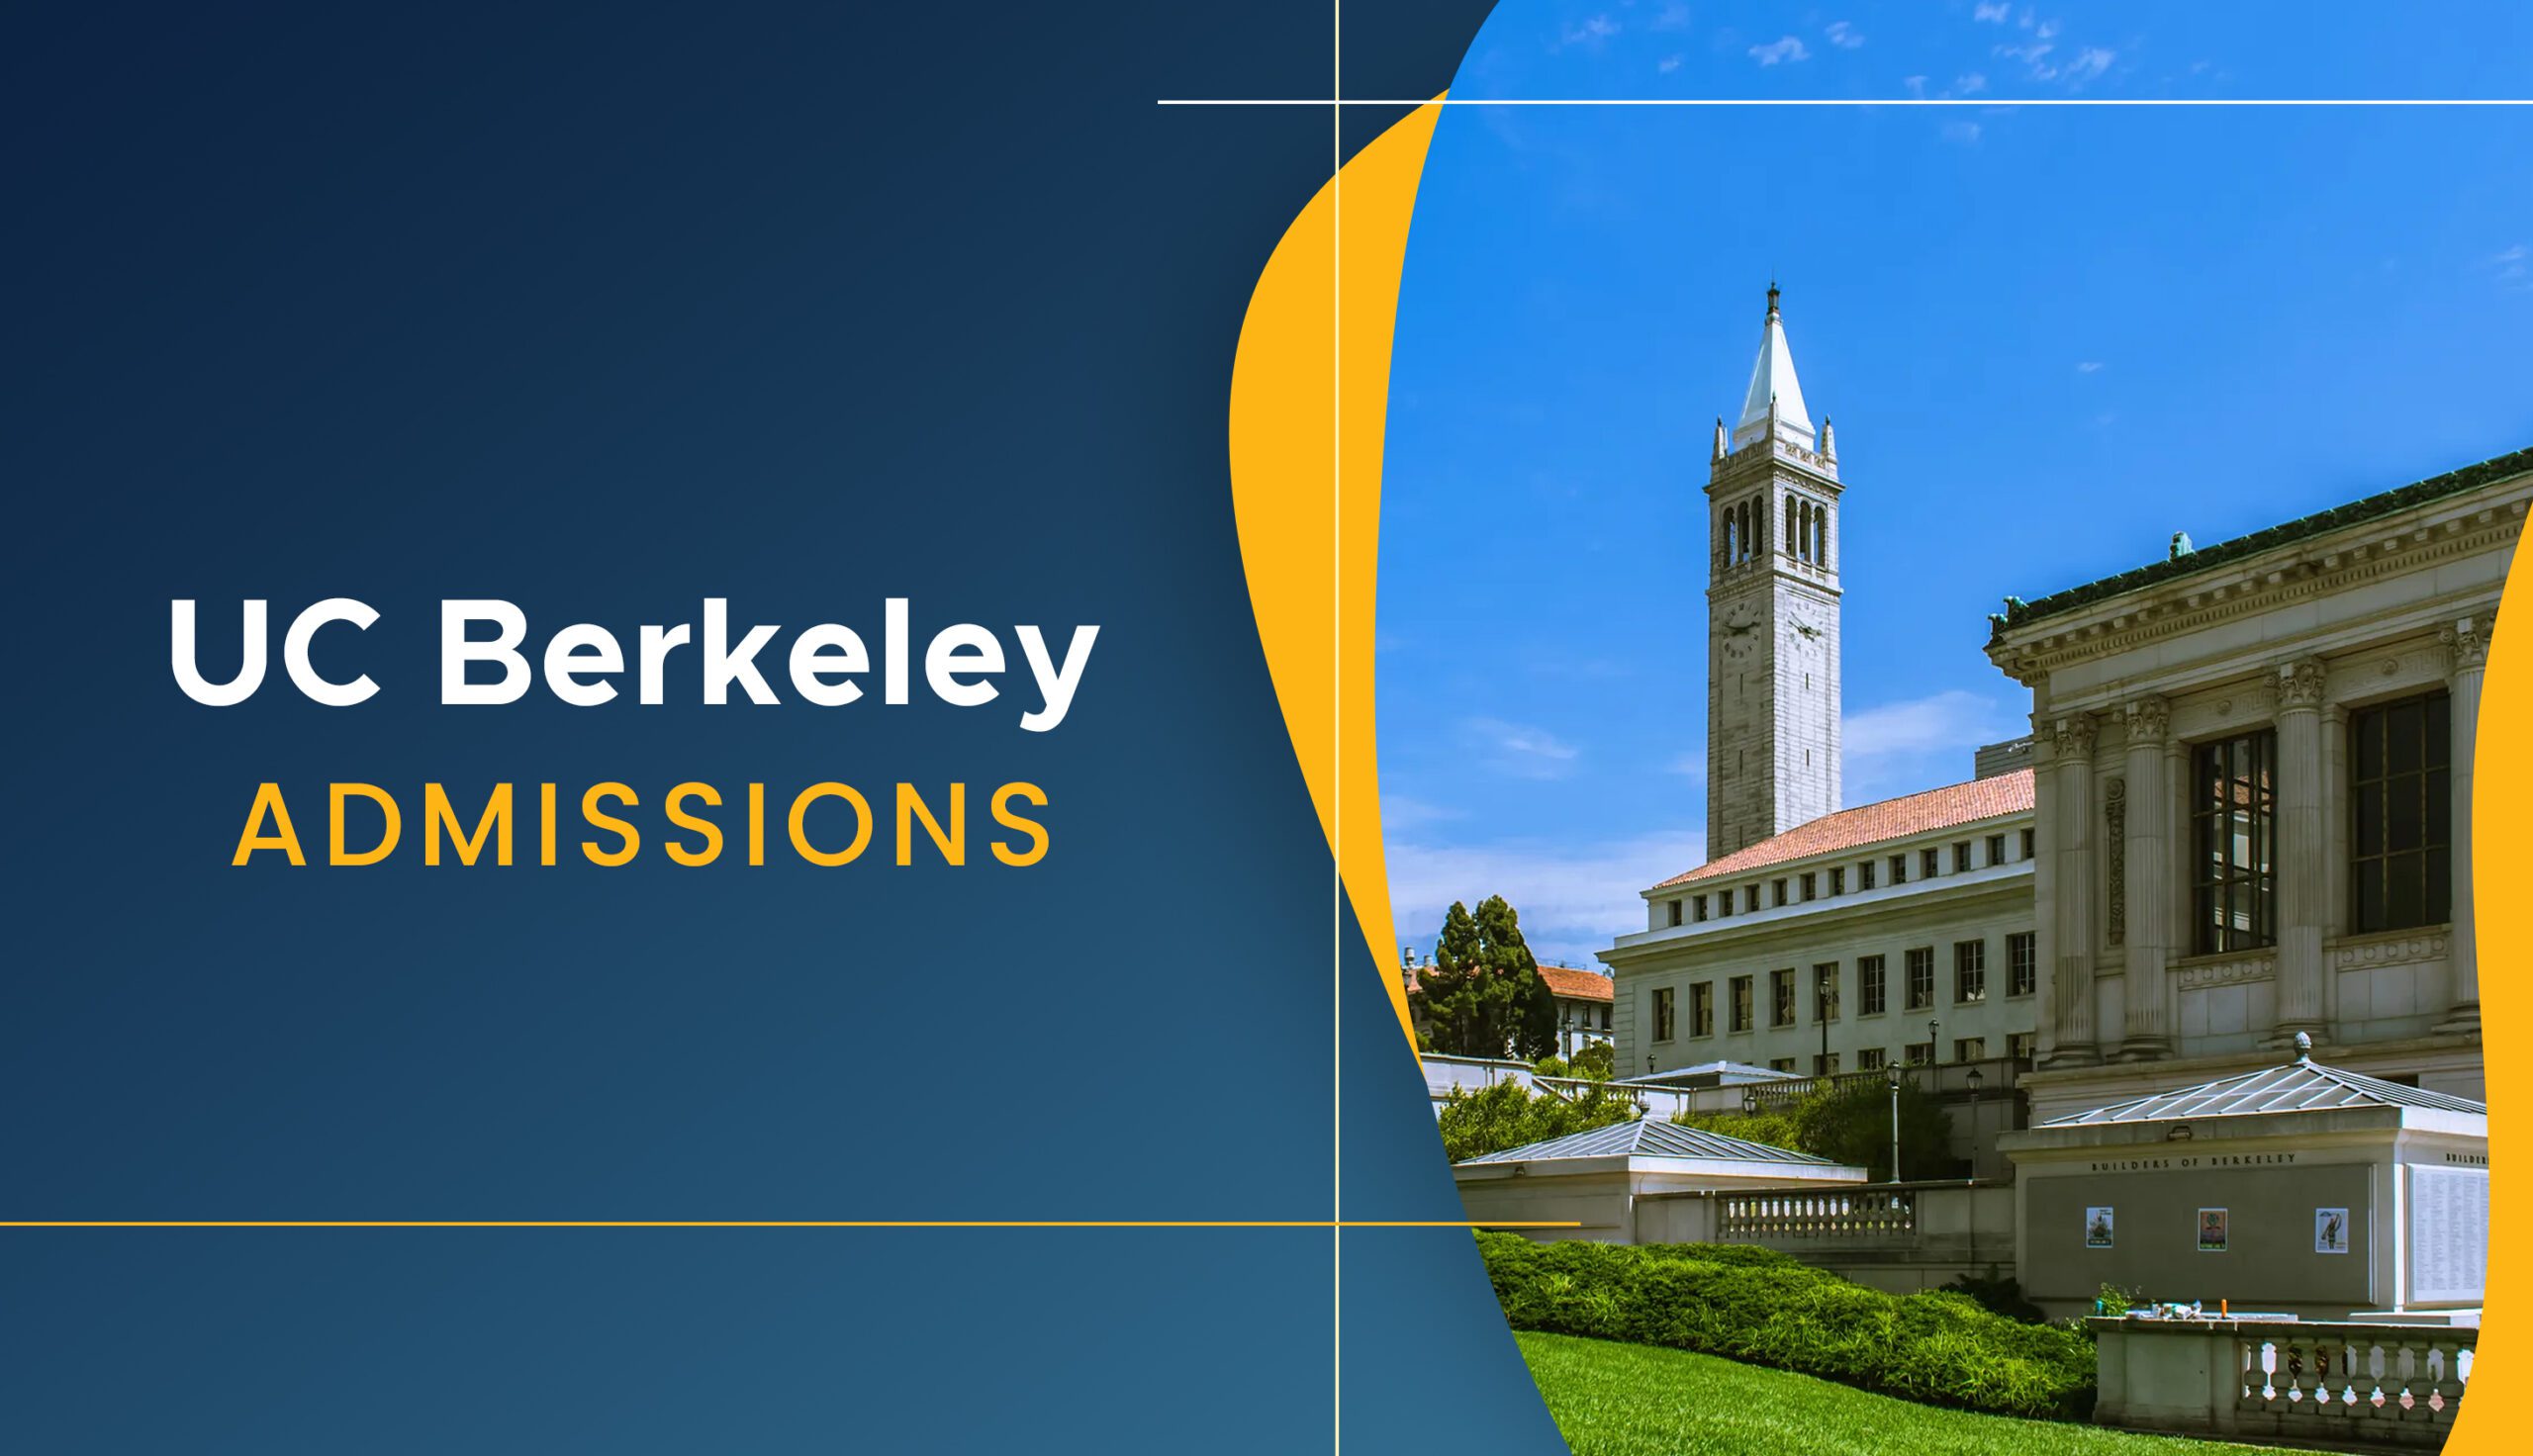 uc berkeley political science phd admissions